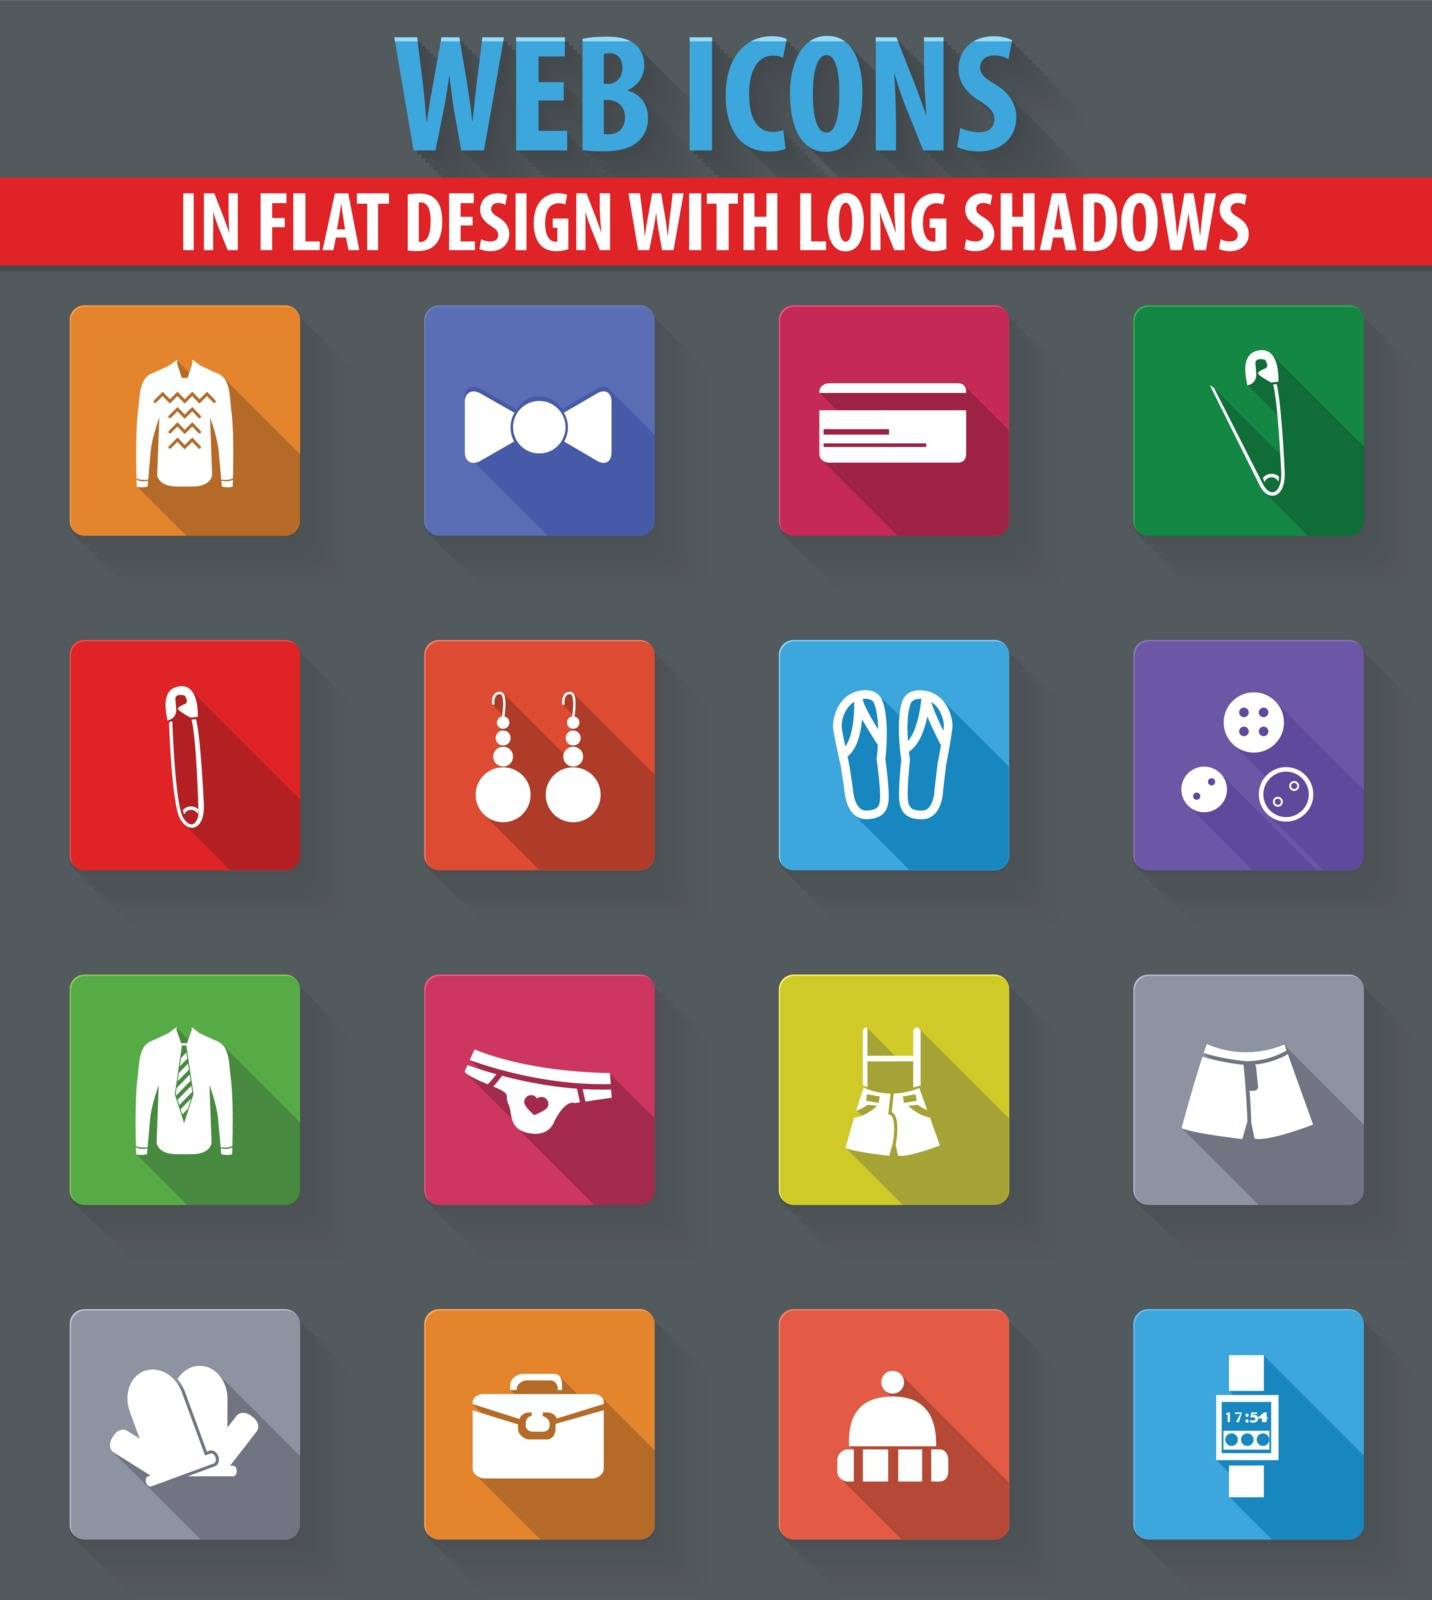 Clothing Store web icons in flat design with long shadows